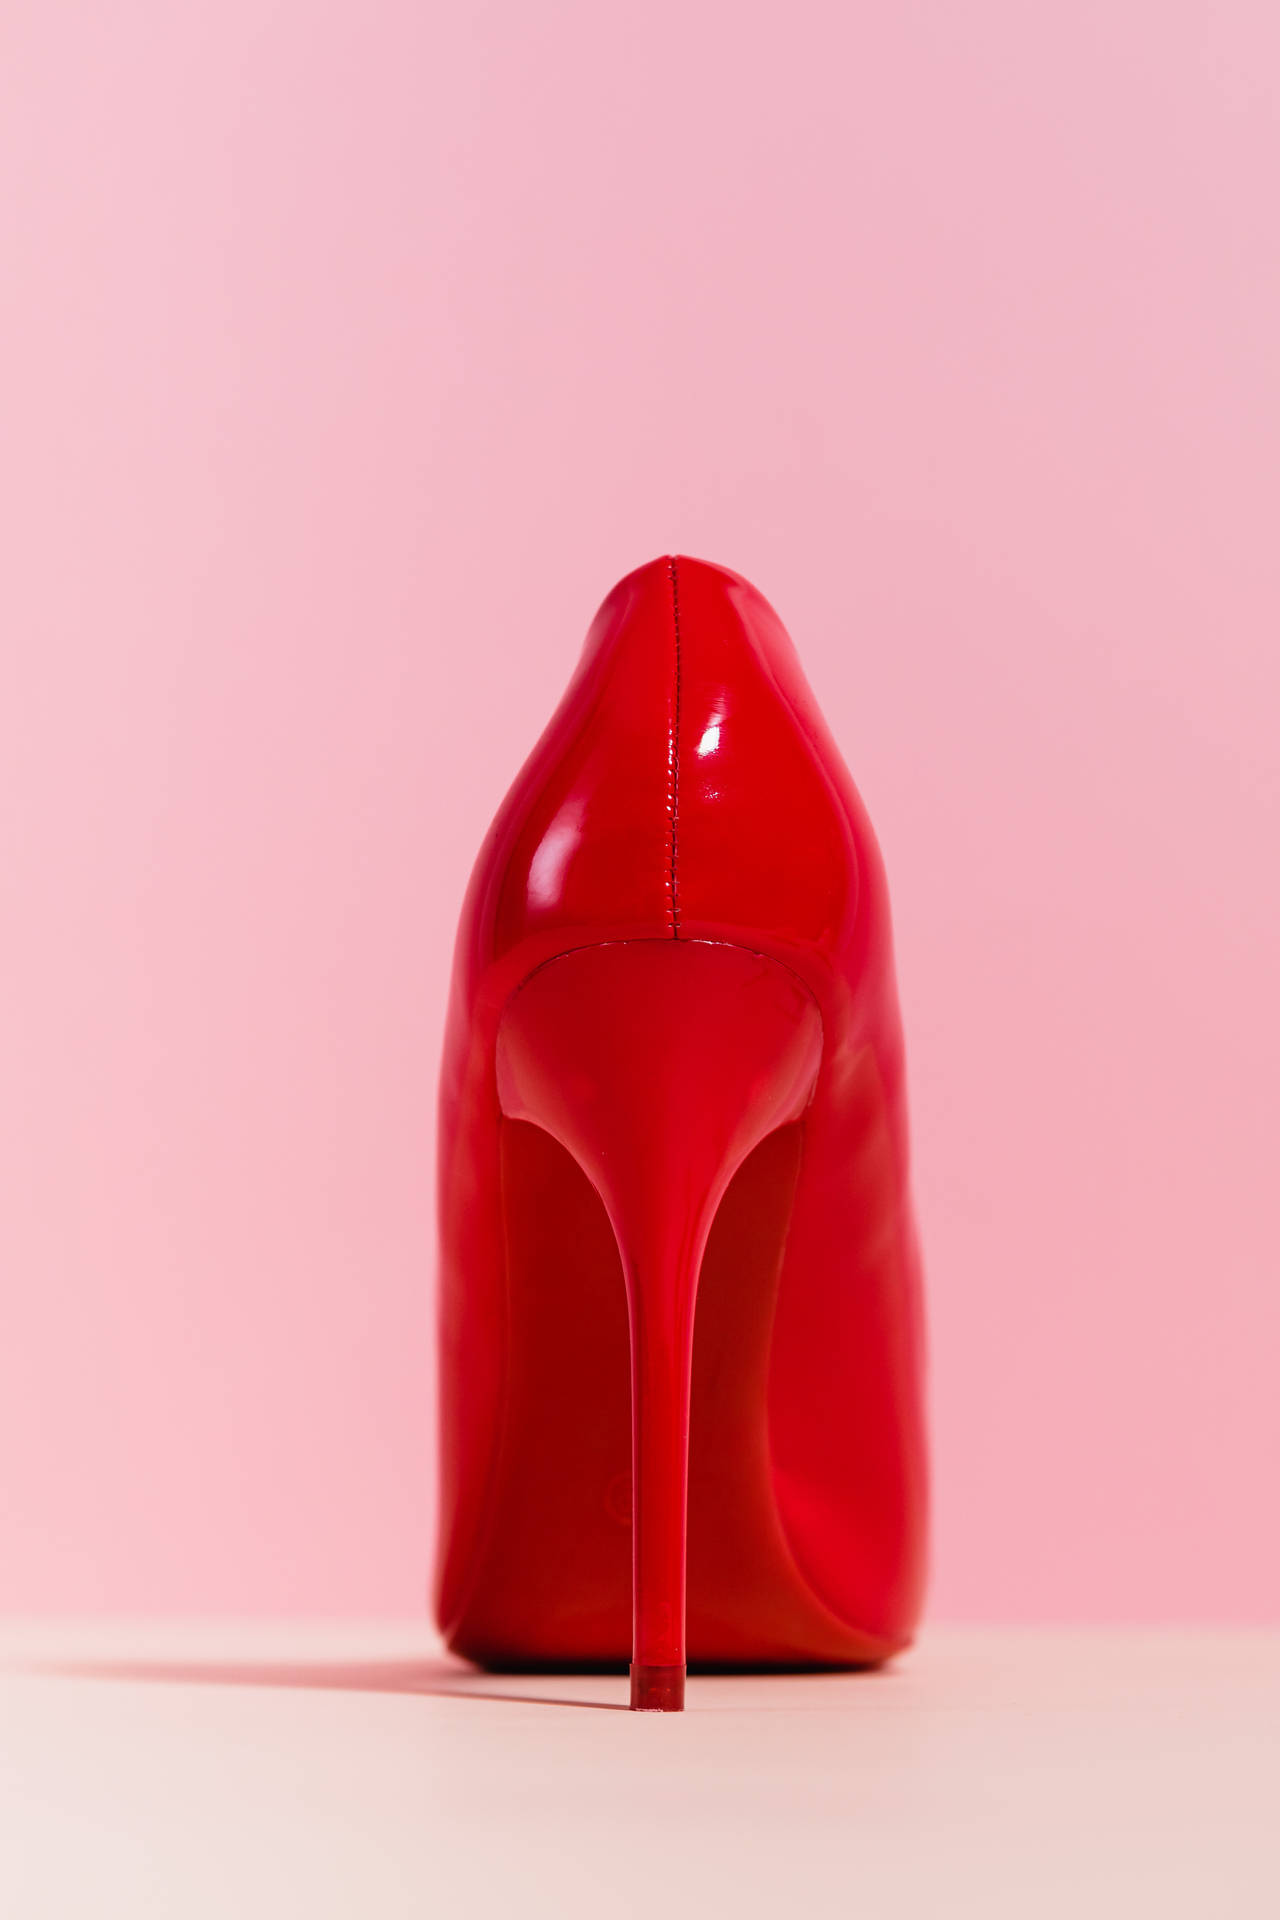 Red Heels On Pink Background Wallpaper